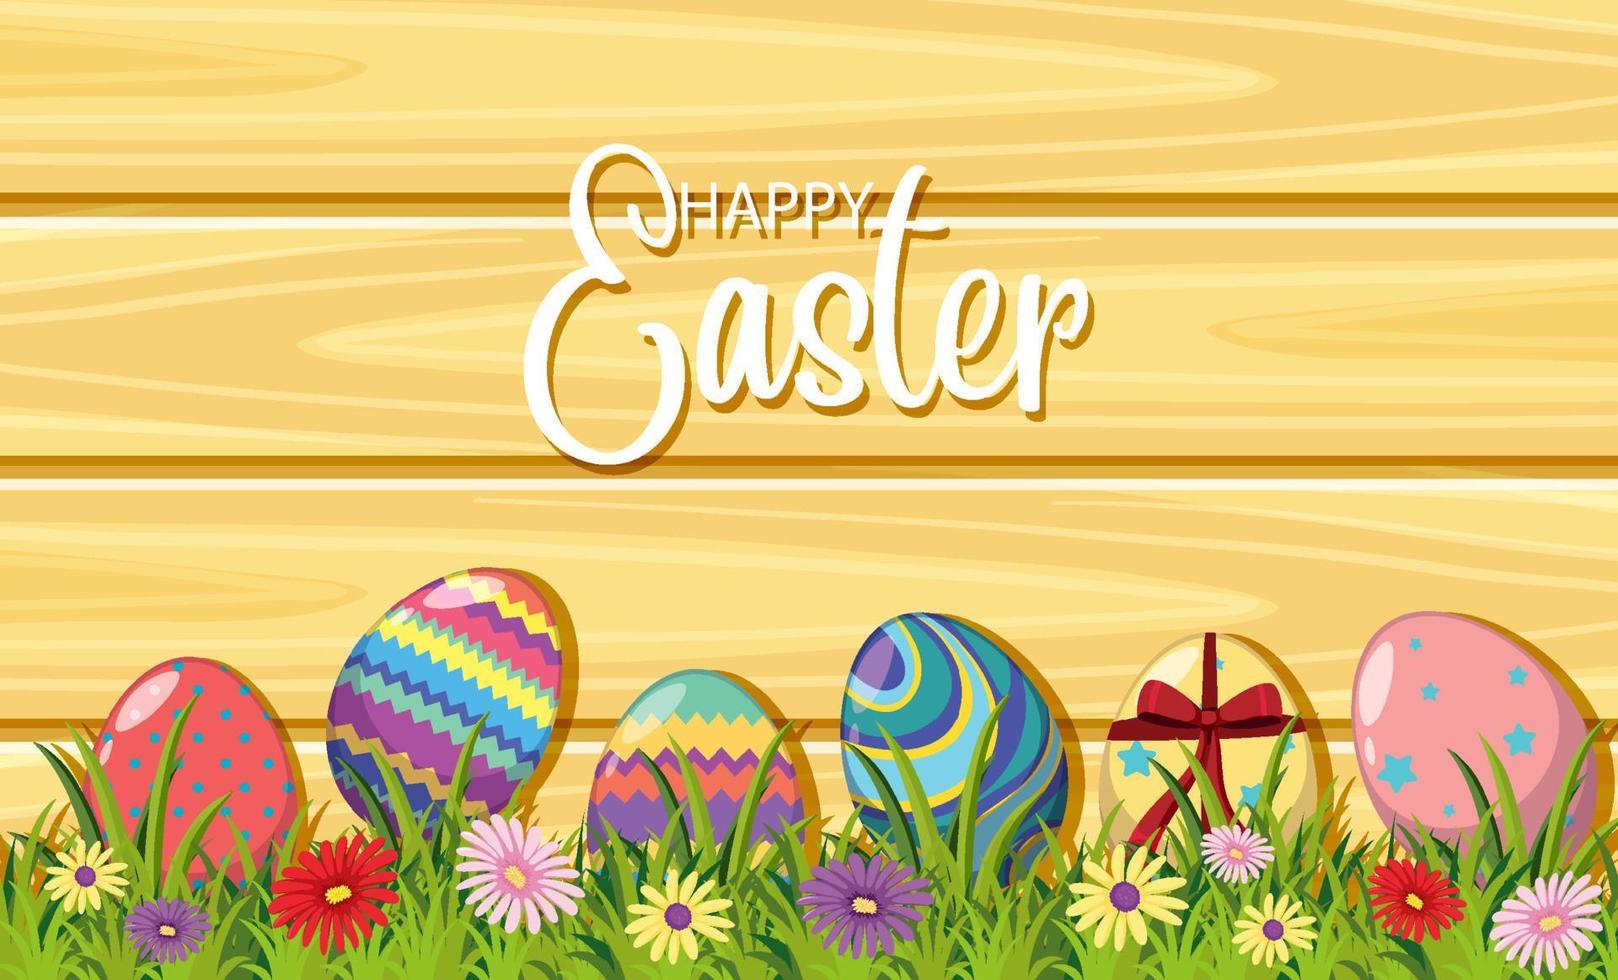 Happy Easter design with decorated eggs in garden vector